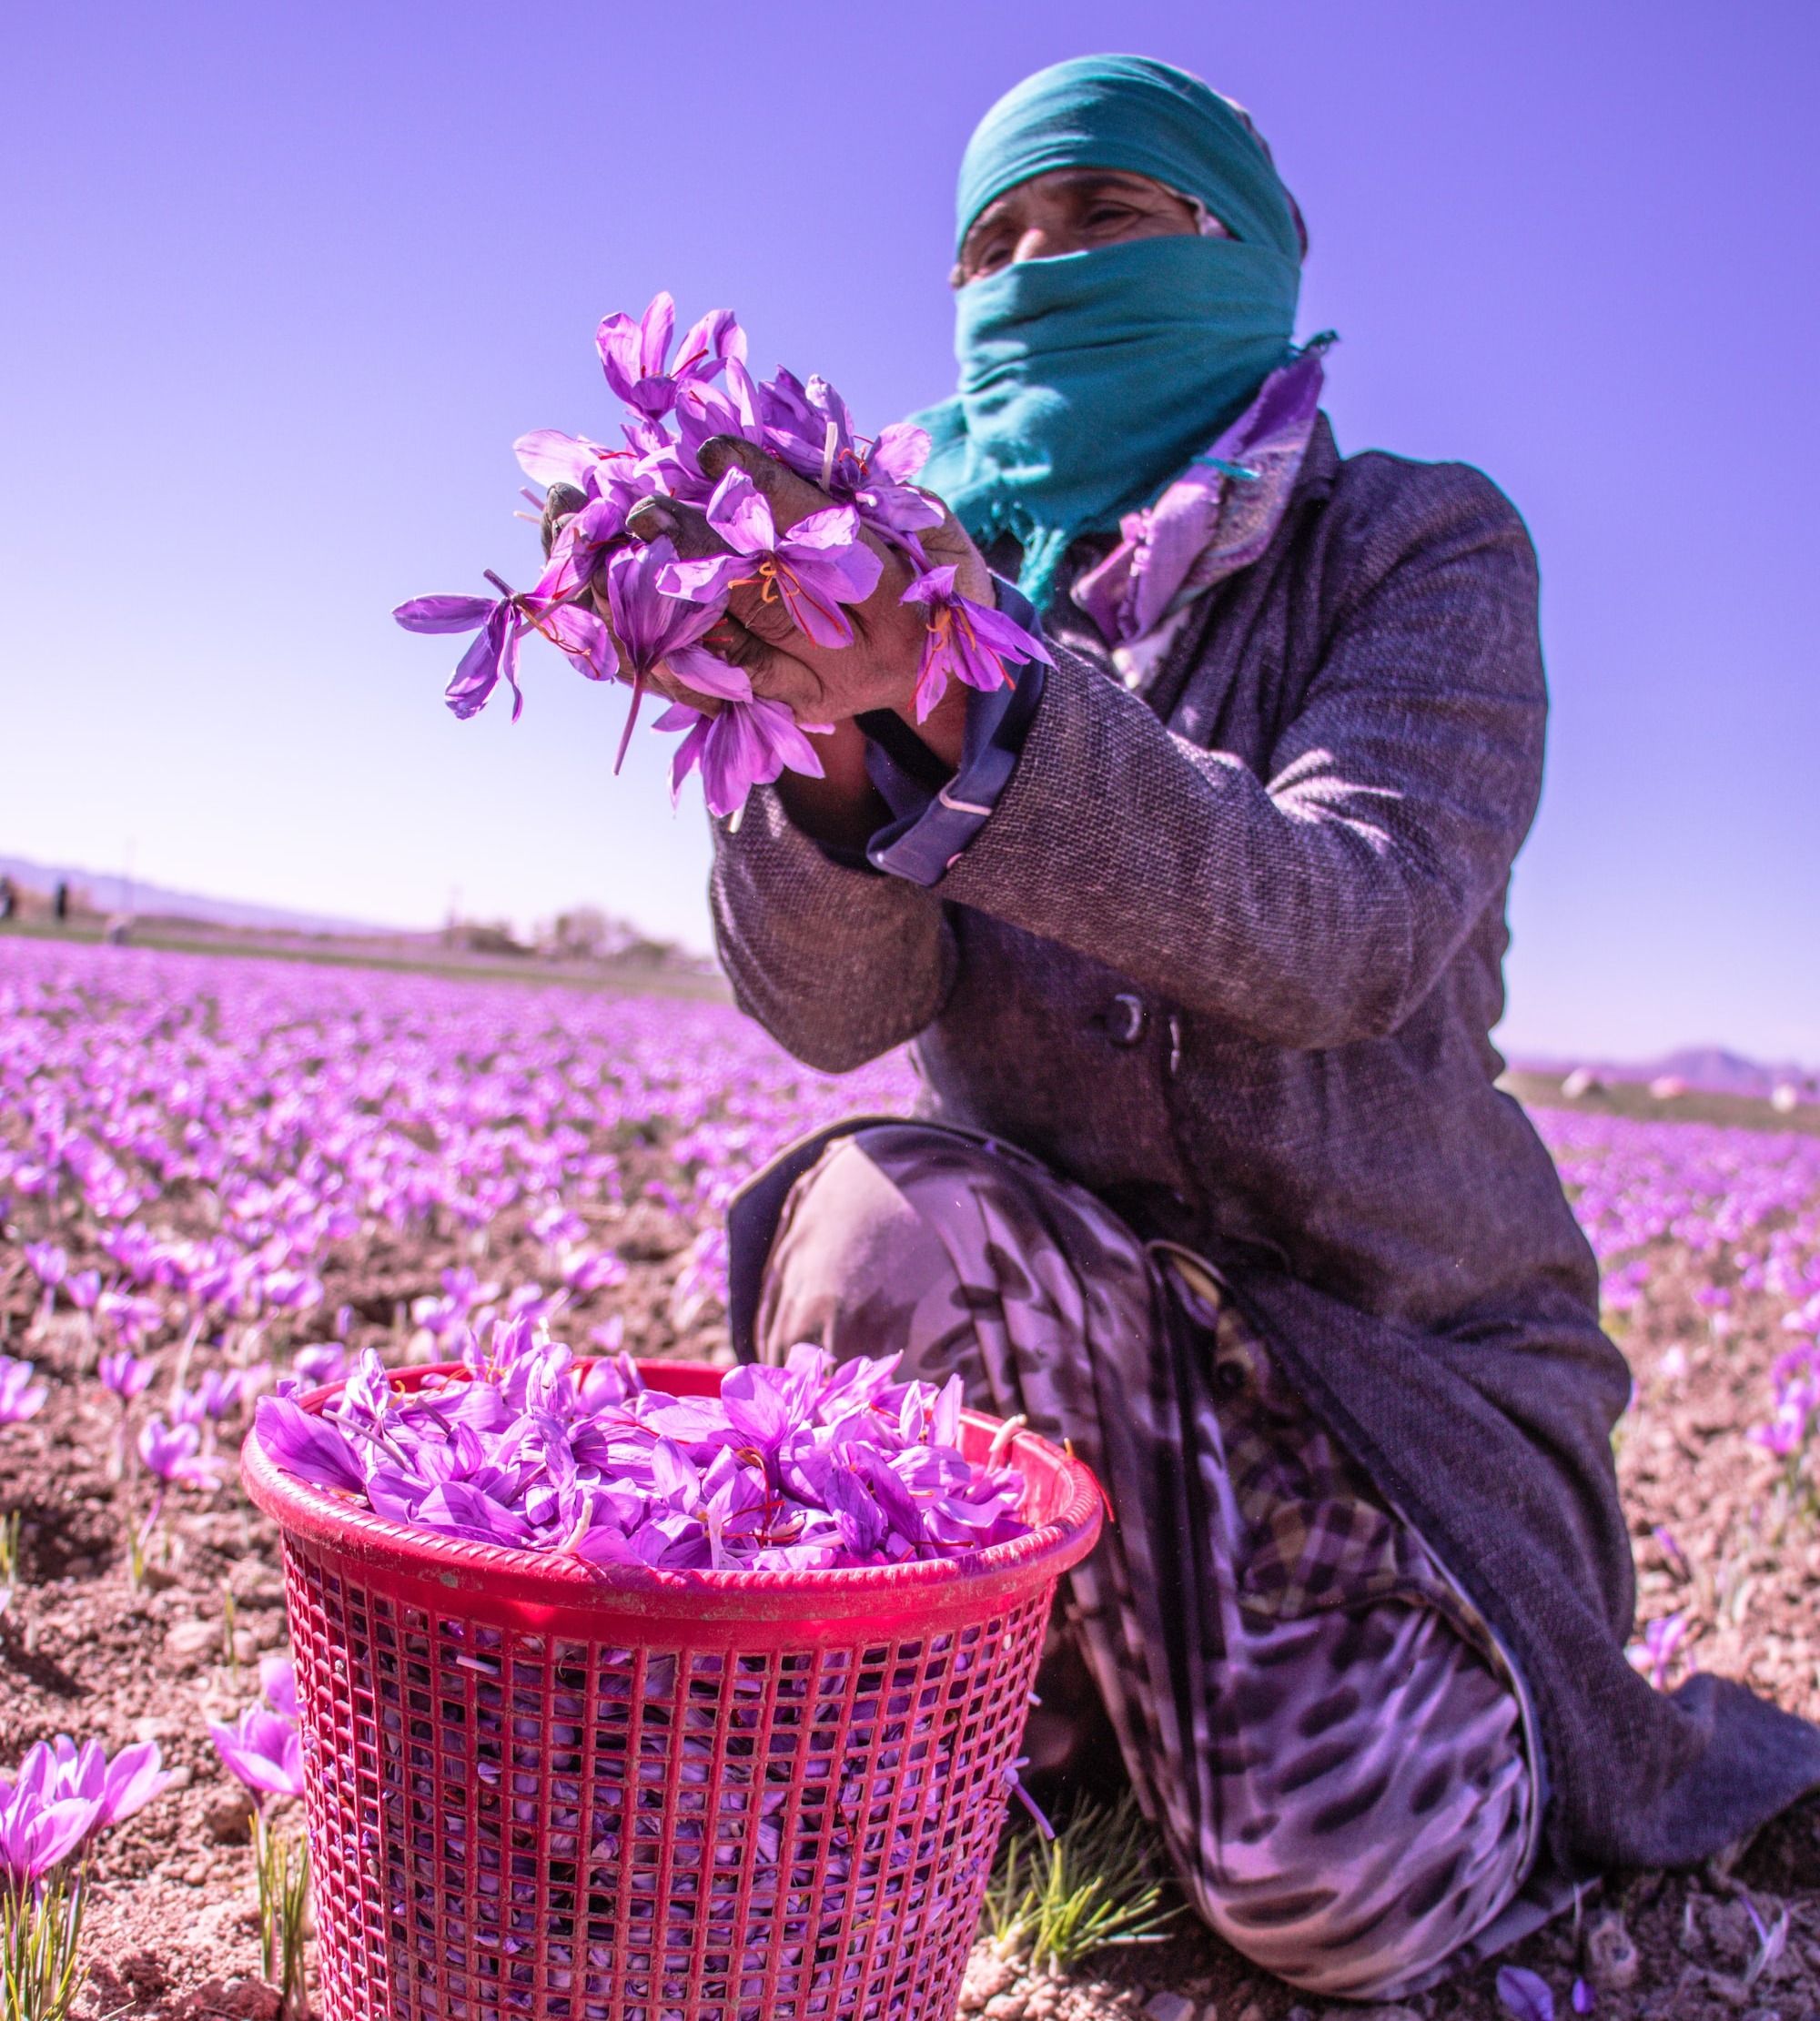 a person kneeling down in a field with purple flowers